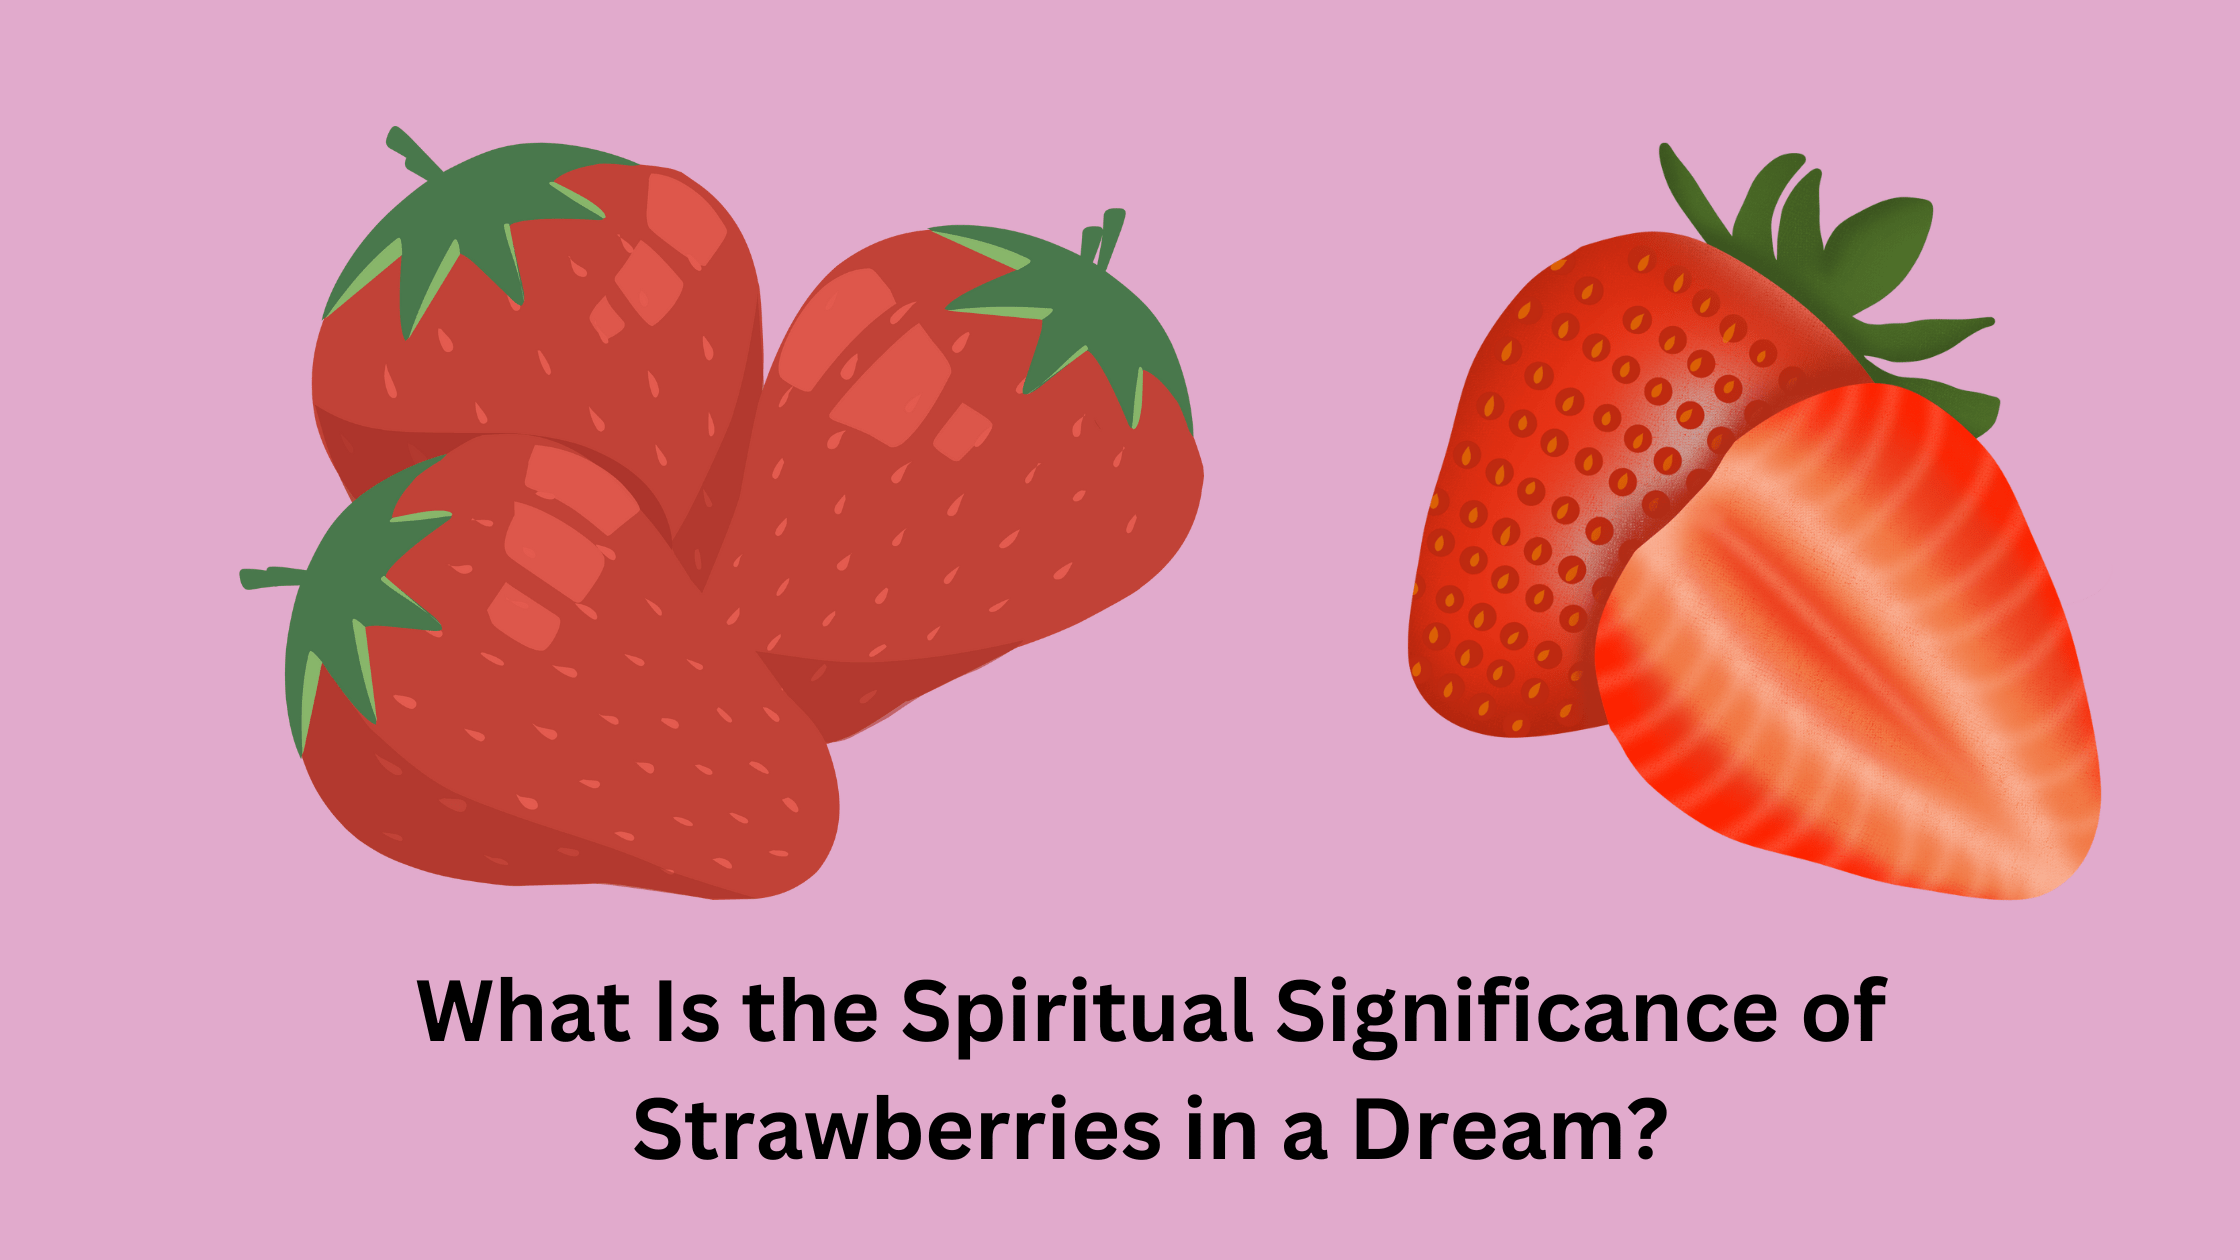 What Is the Spiritual Significance of Strawberries in a Dream